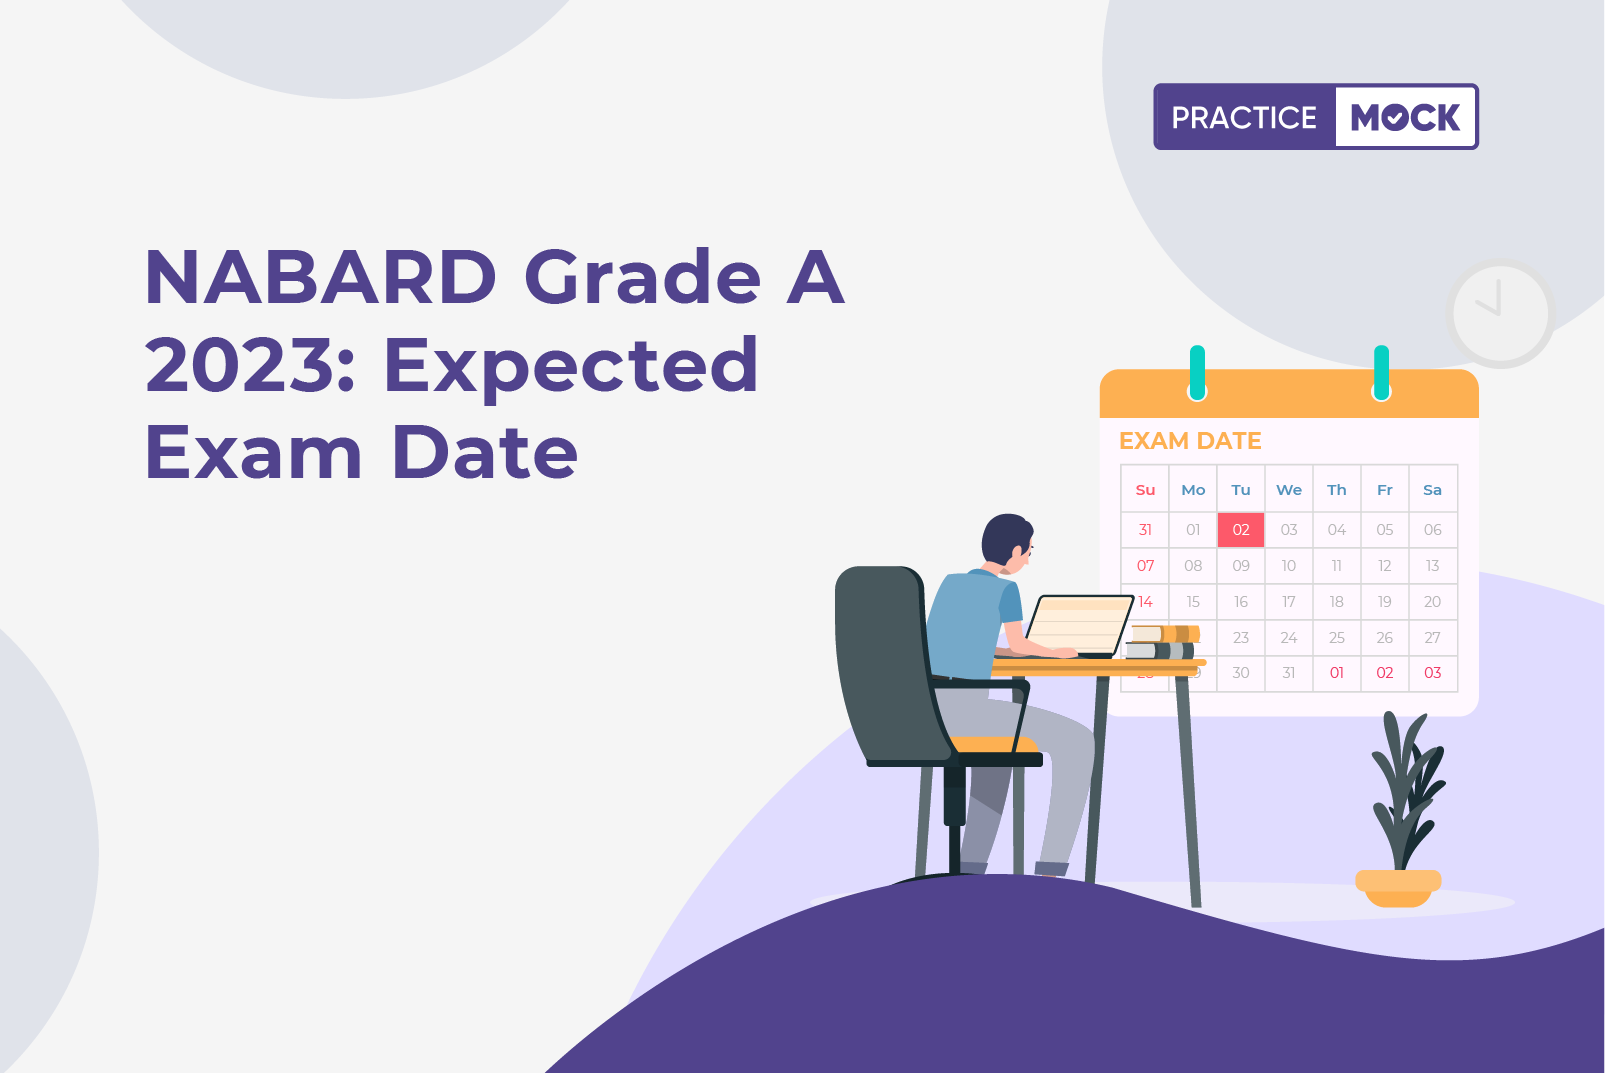 NABARD Grade A 2023 Expected Exam Date